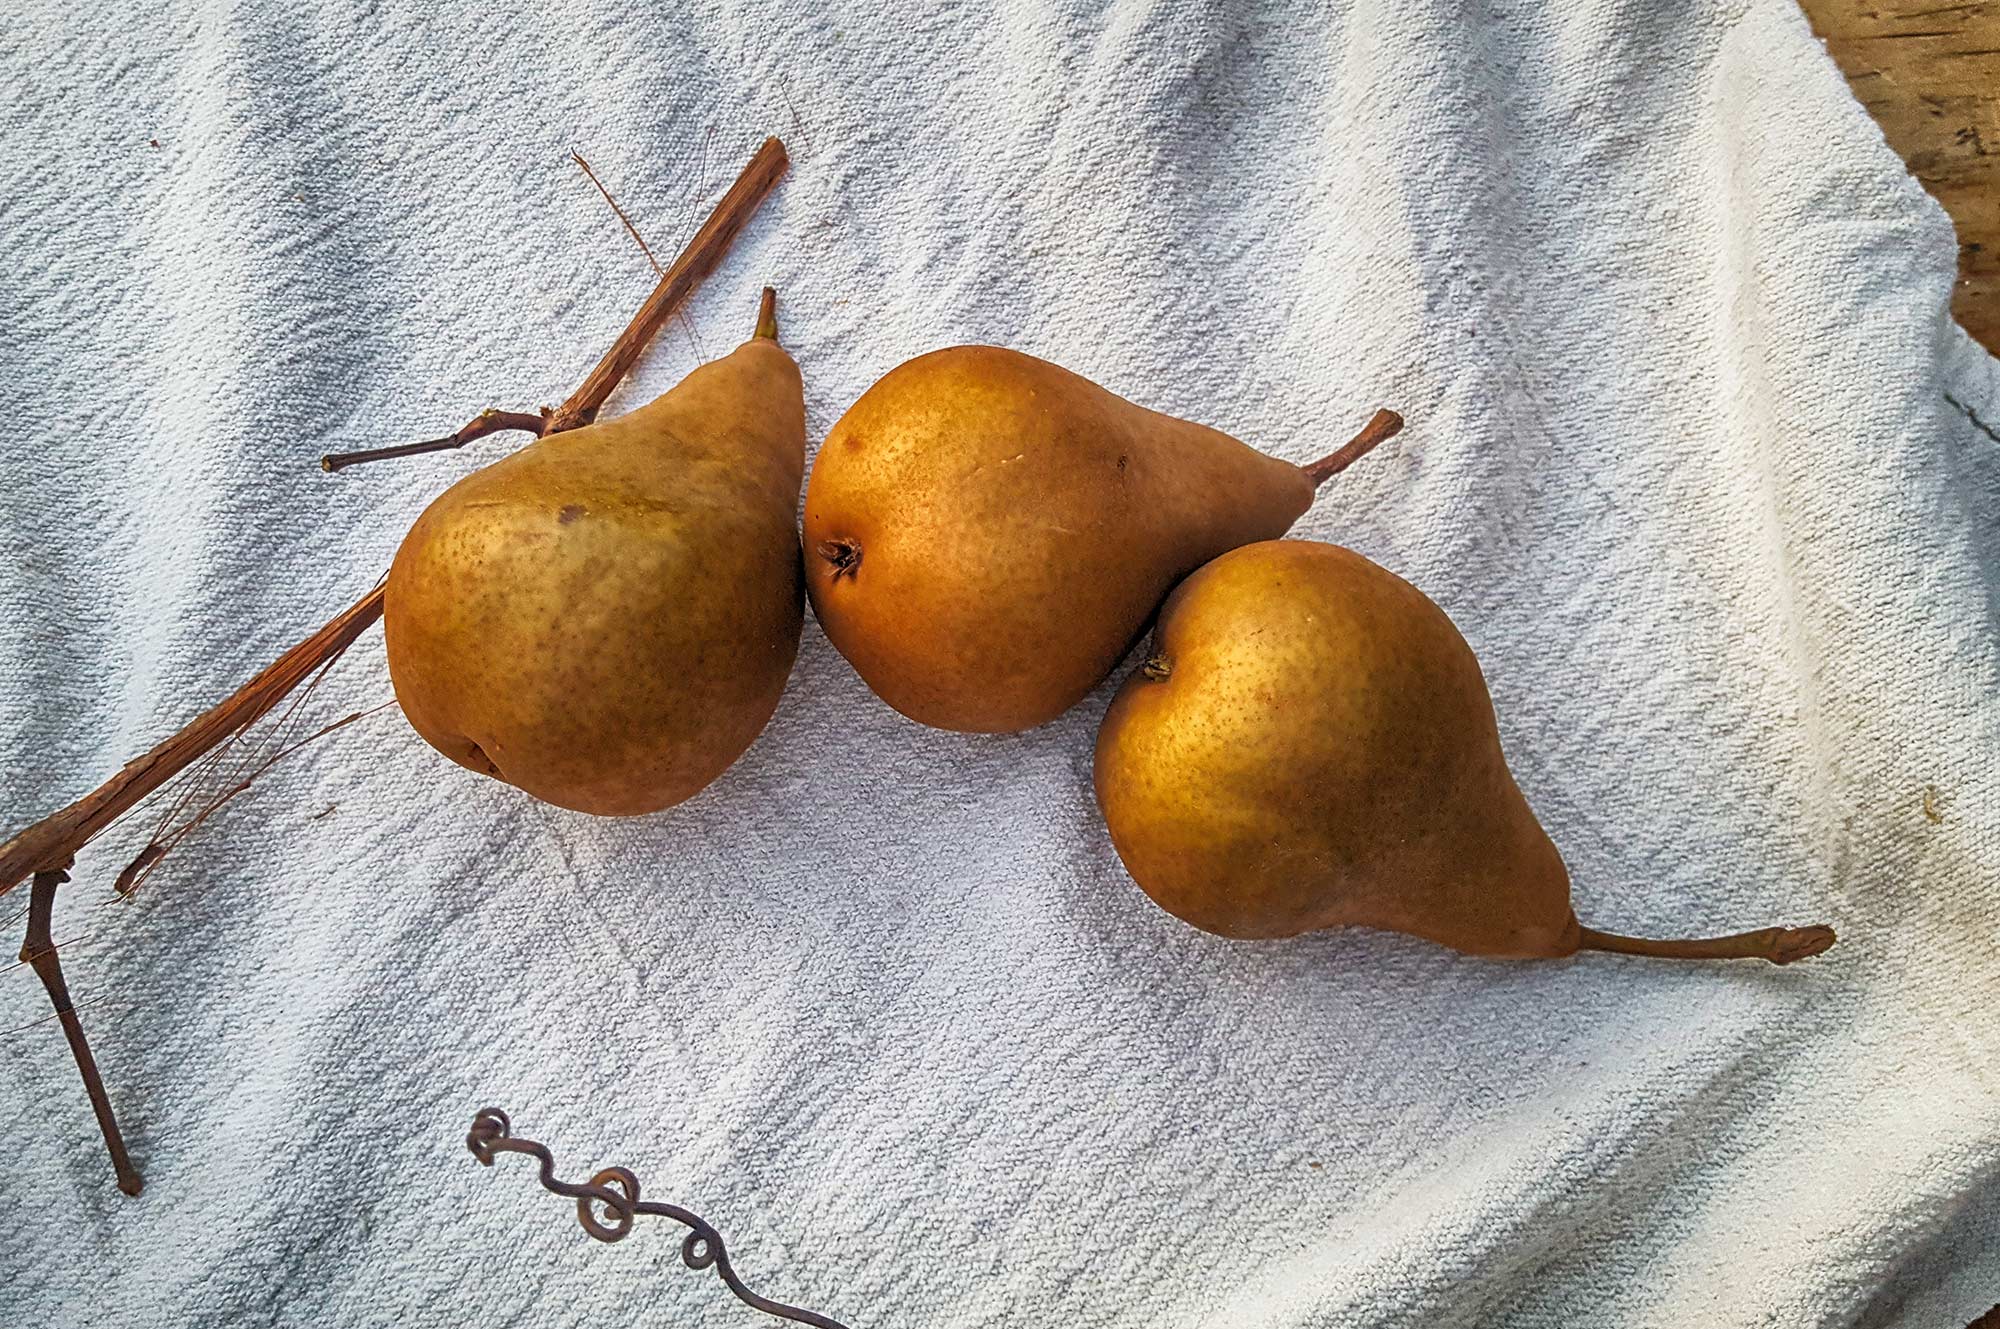  pears ©2017 by bret wills